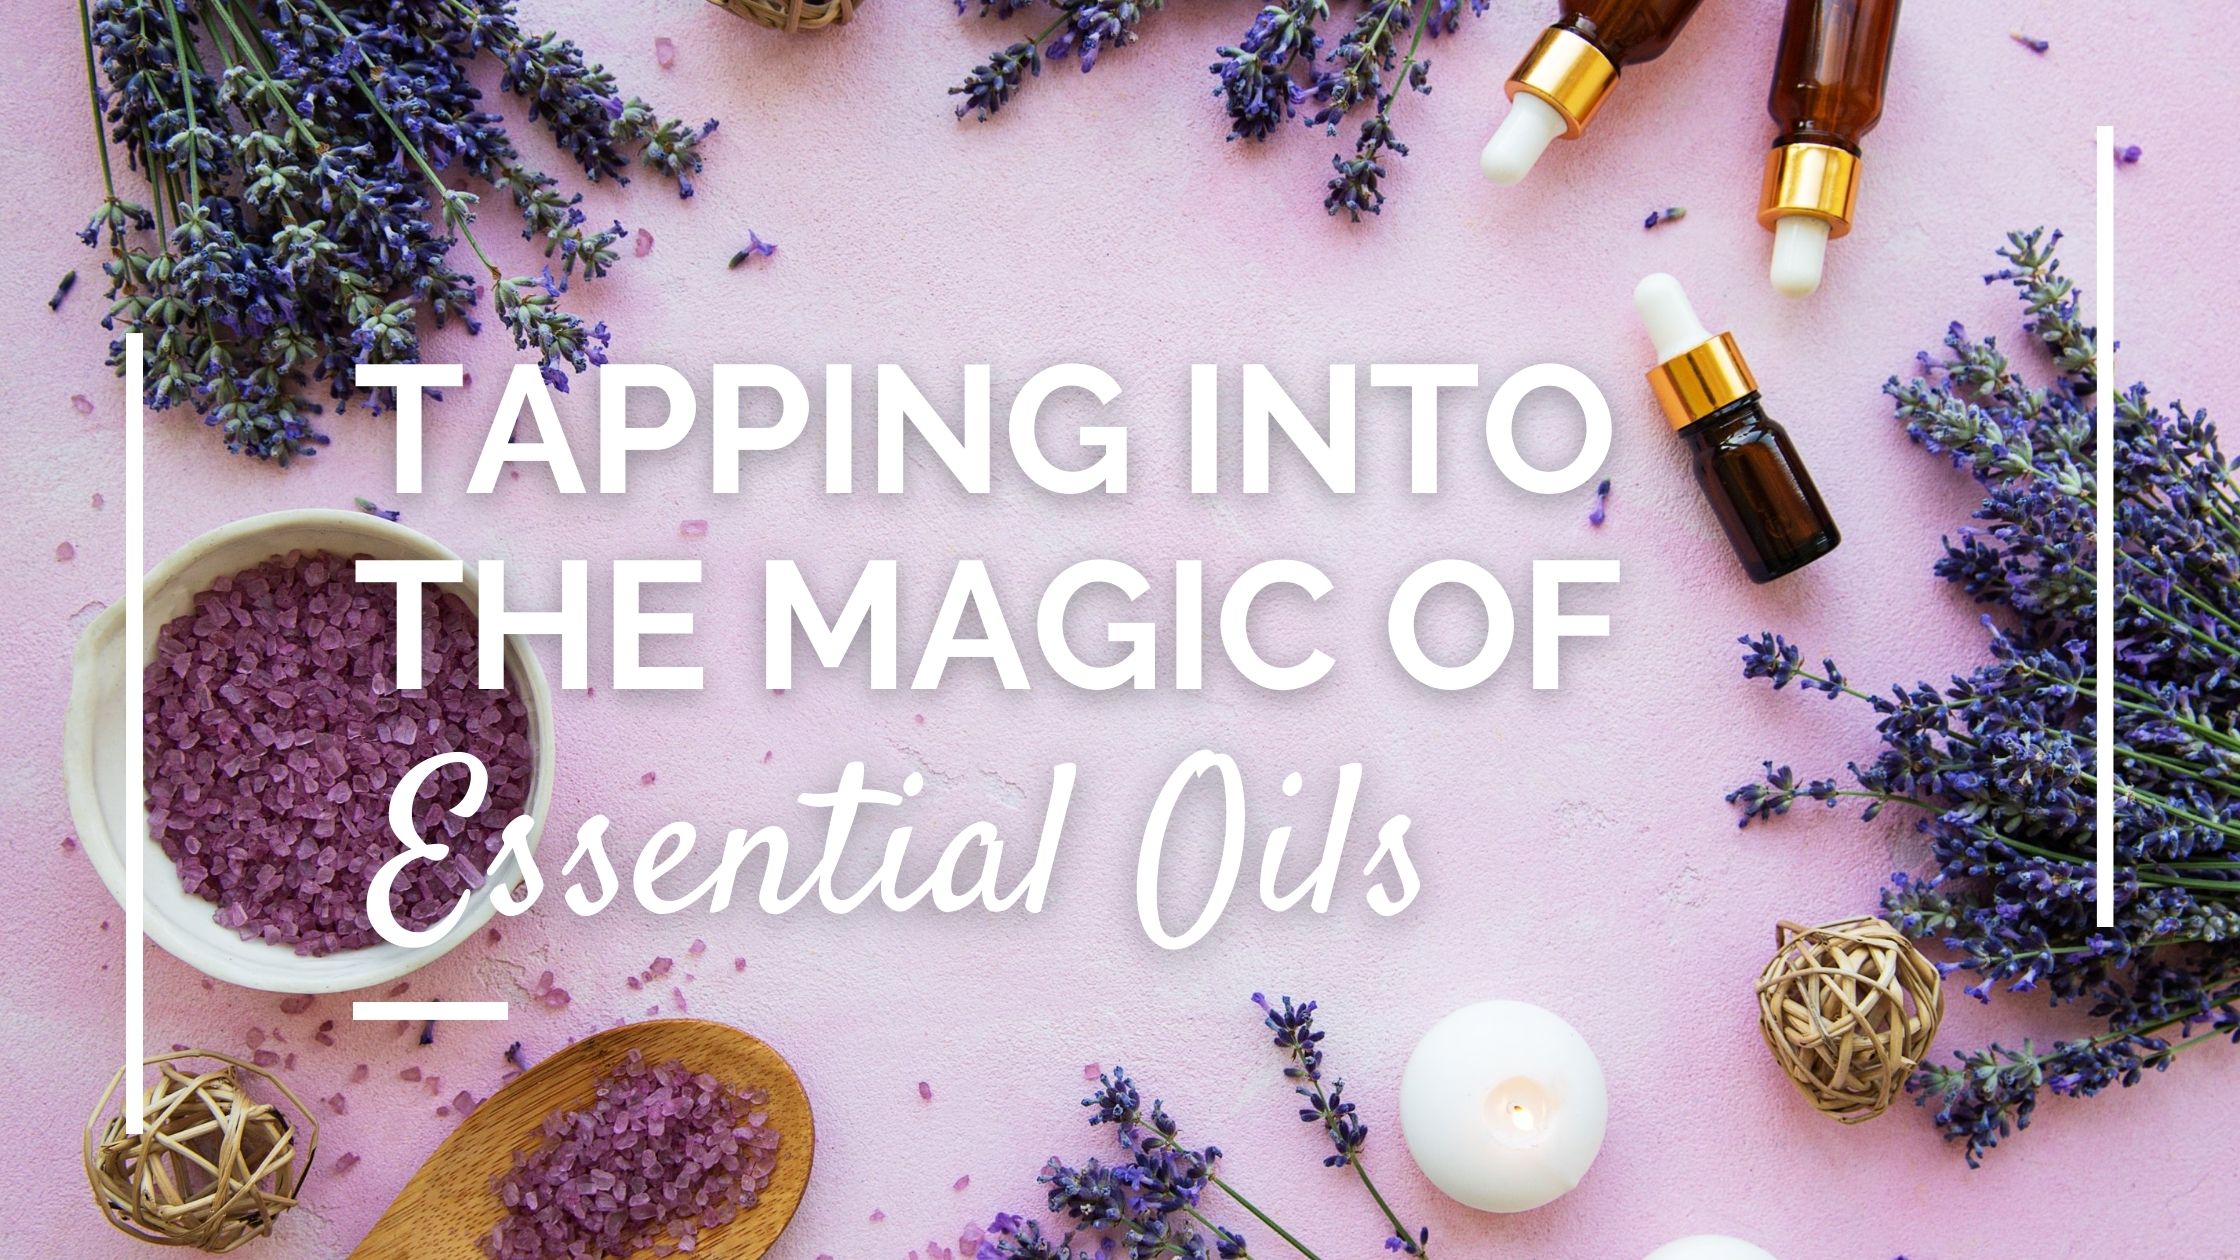 Tapping into the Magic of Essential Oils